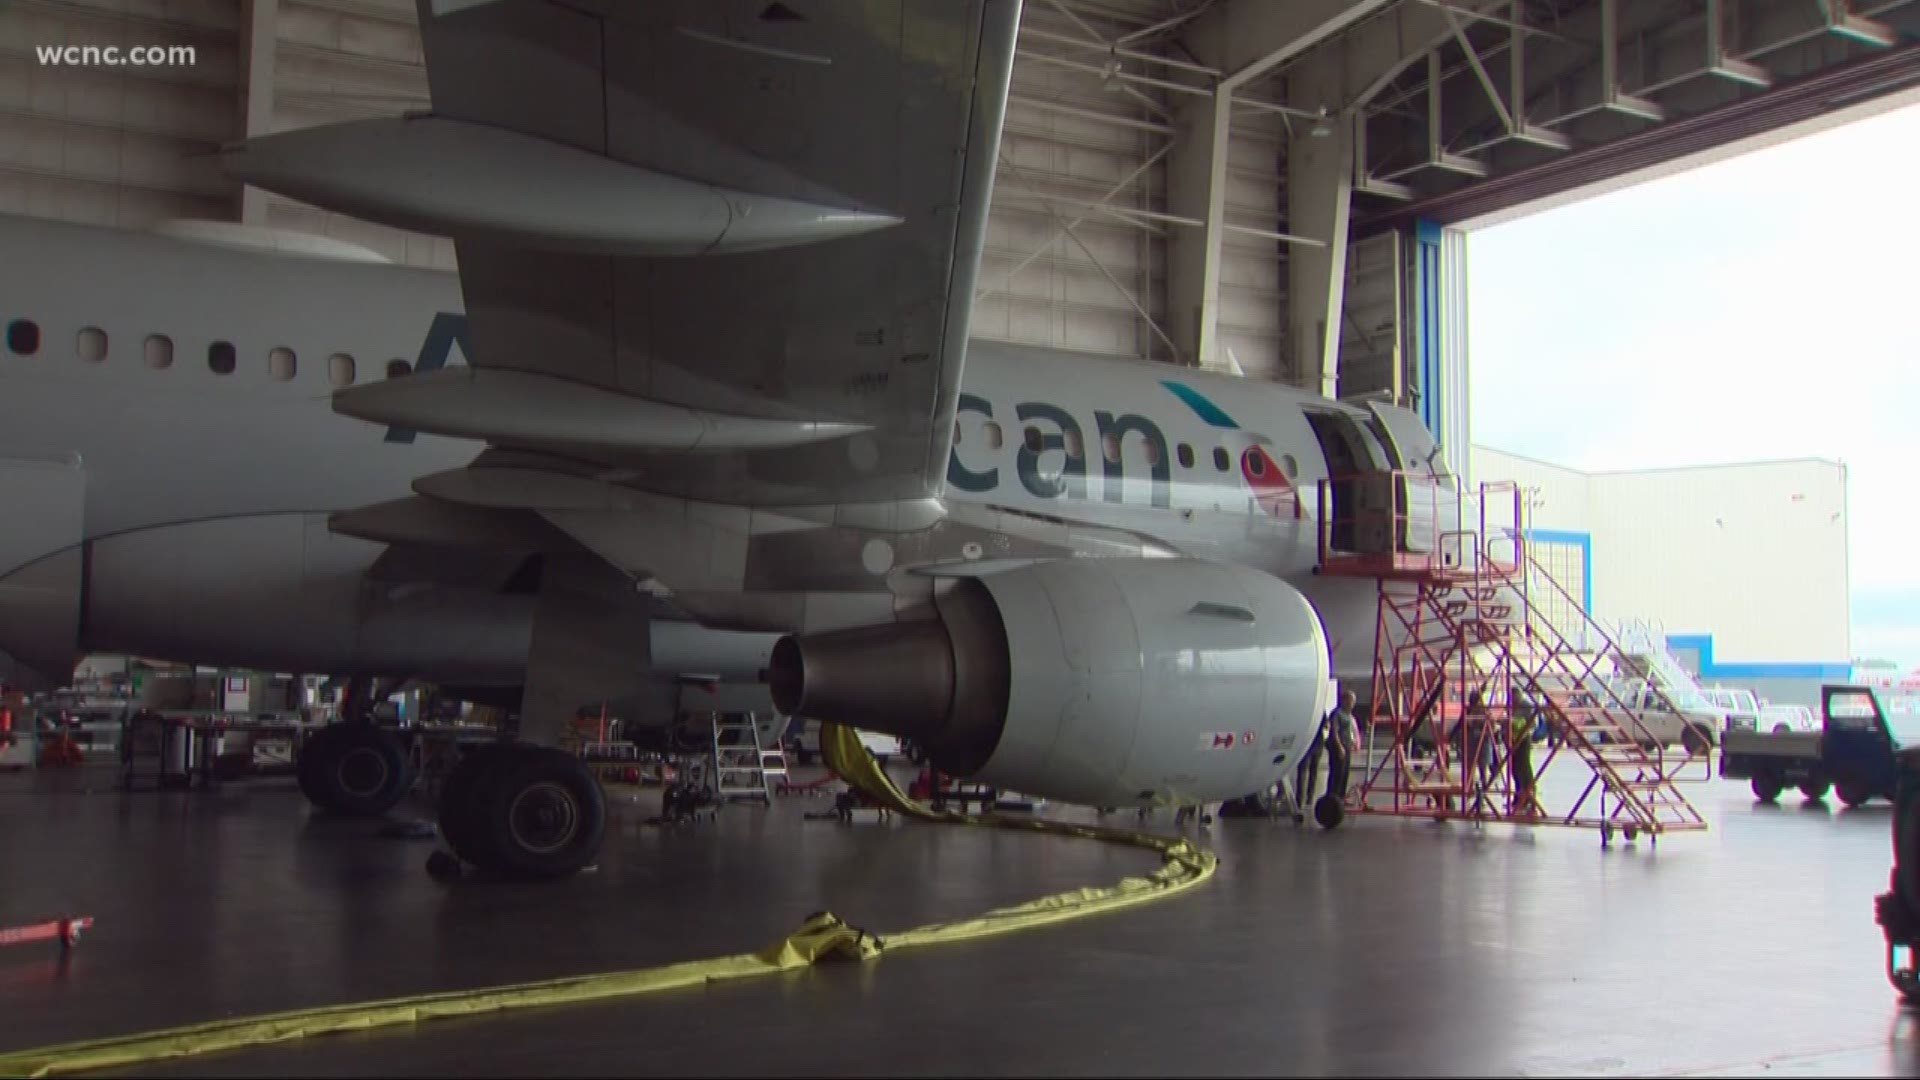 Right now, thousands of maintenance technicians are working around the clock to make sure these planes fly safely.